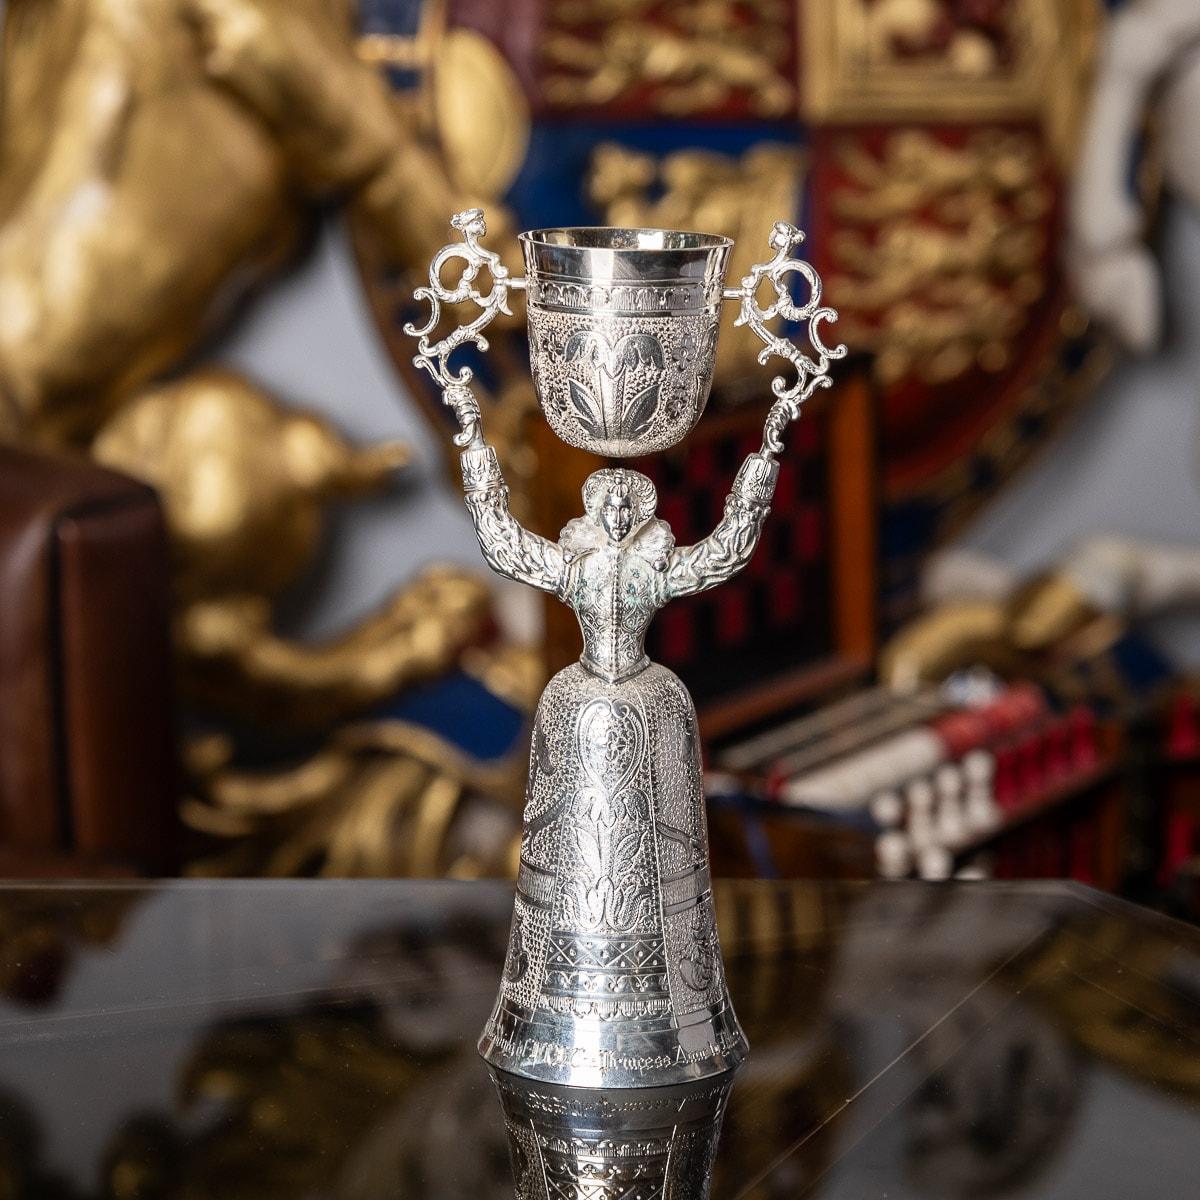 Novelty 20th century solid silver wager / marriage cup, the cups design inspired by the early 16th century German example, modelled as a female figure supporting over her head a smalled domed swiveling cup and the lower cups half chased with